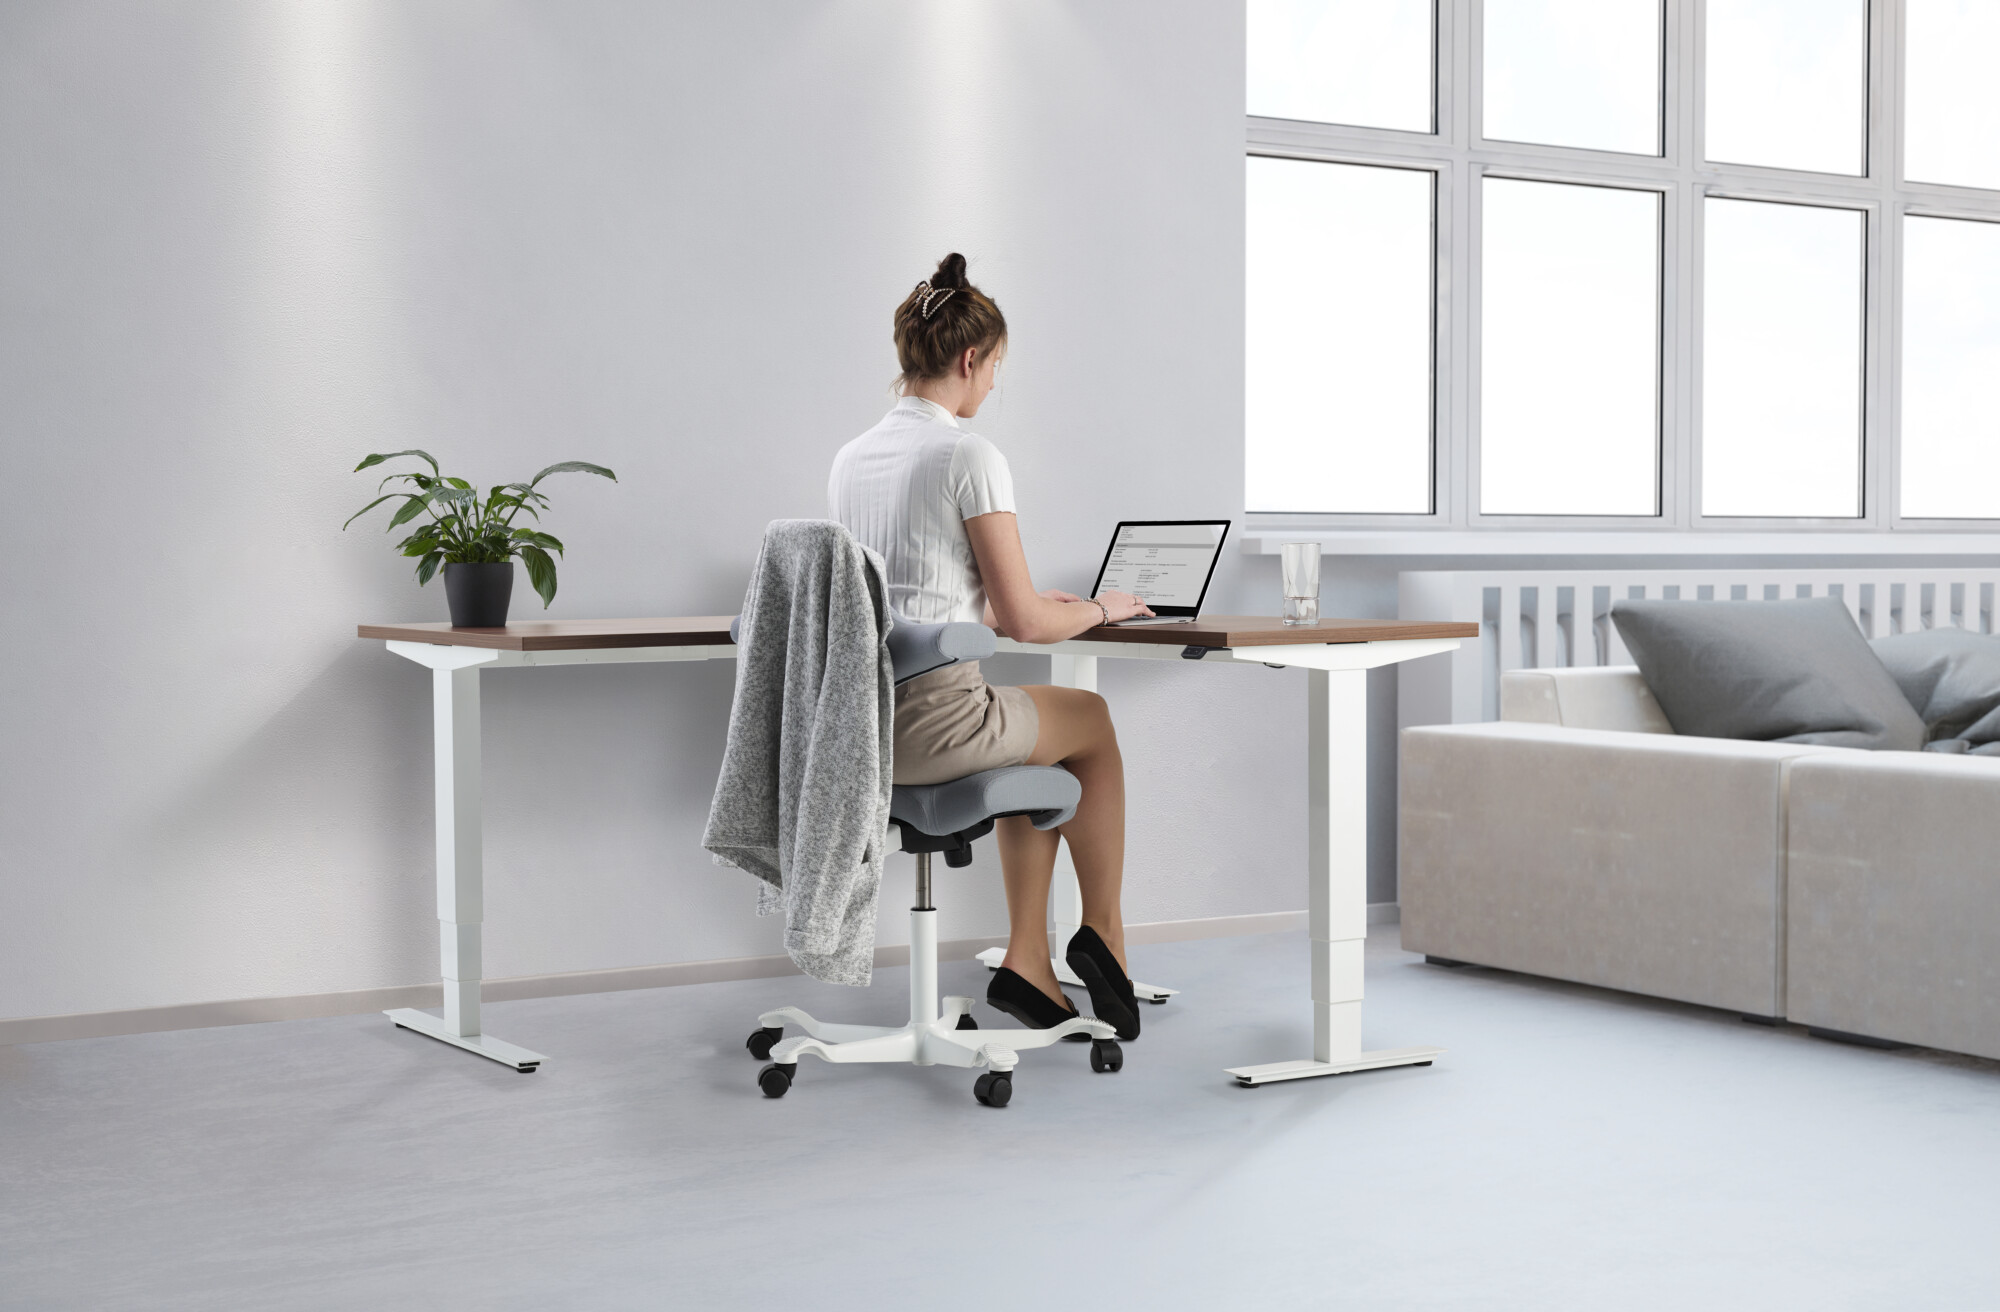 The correct posture when using an ergonomic chair for optimum comfort and proper posture preventing back and neck damage. Forearms should be in-line with your desk so that your elbows are bent at a 90-degree angle when typing or using a mouse and your feet remain flat on the floor or on an ergonomic footrest.